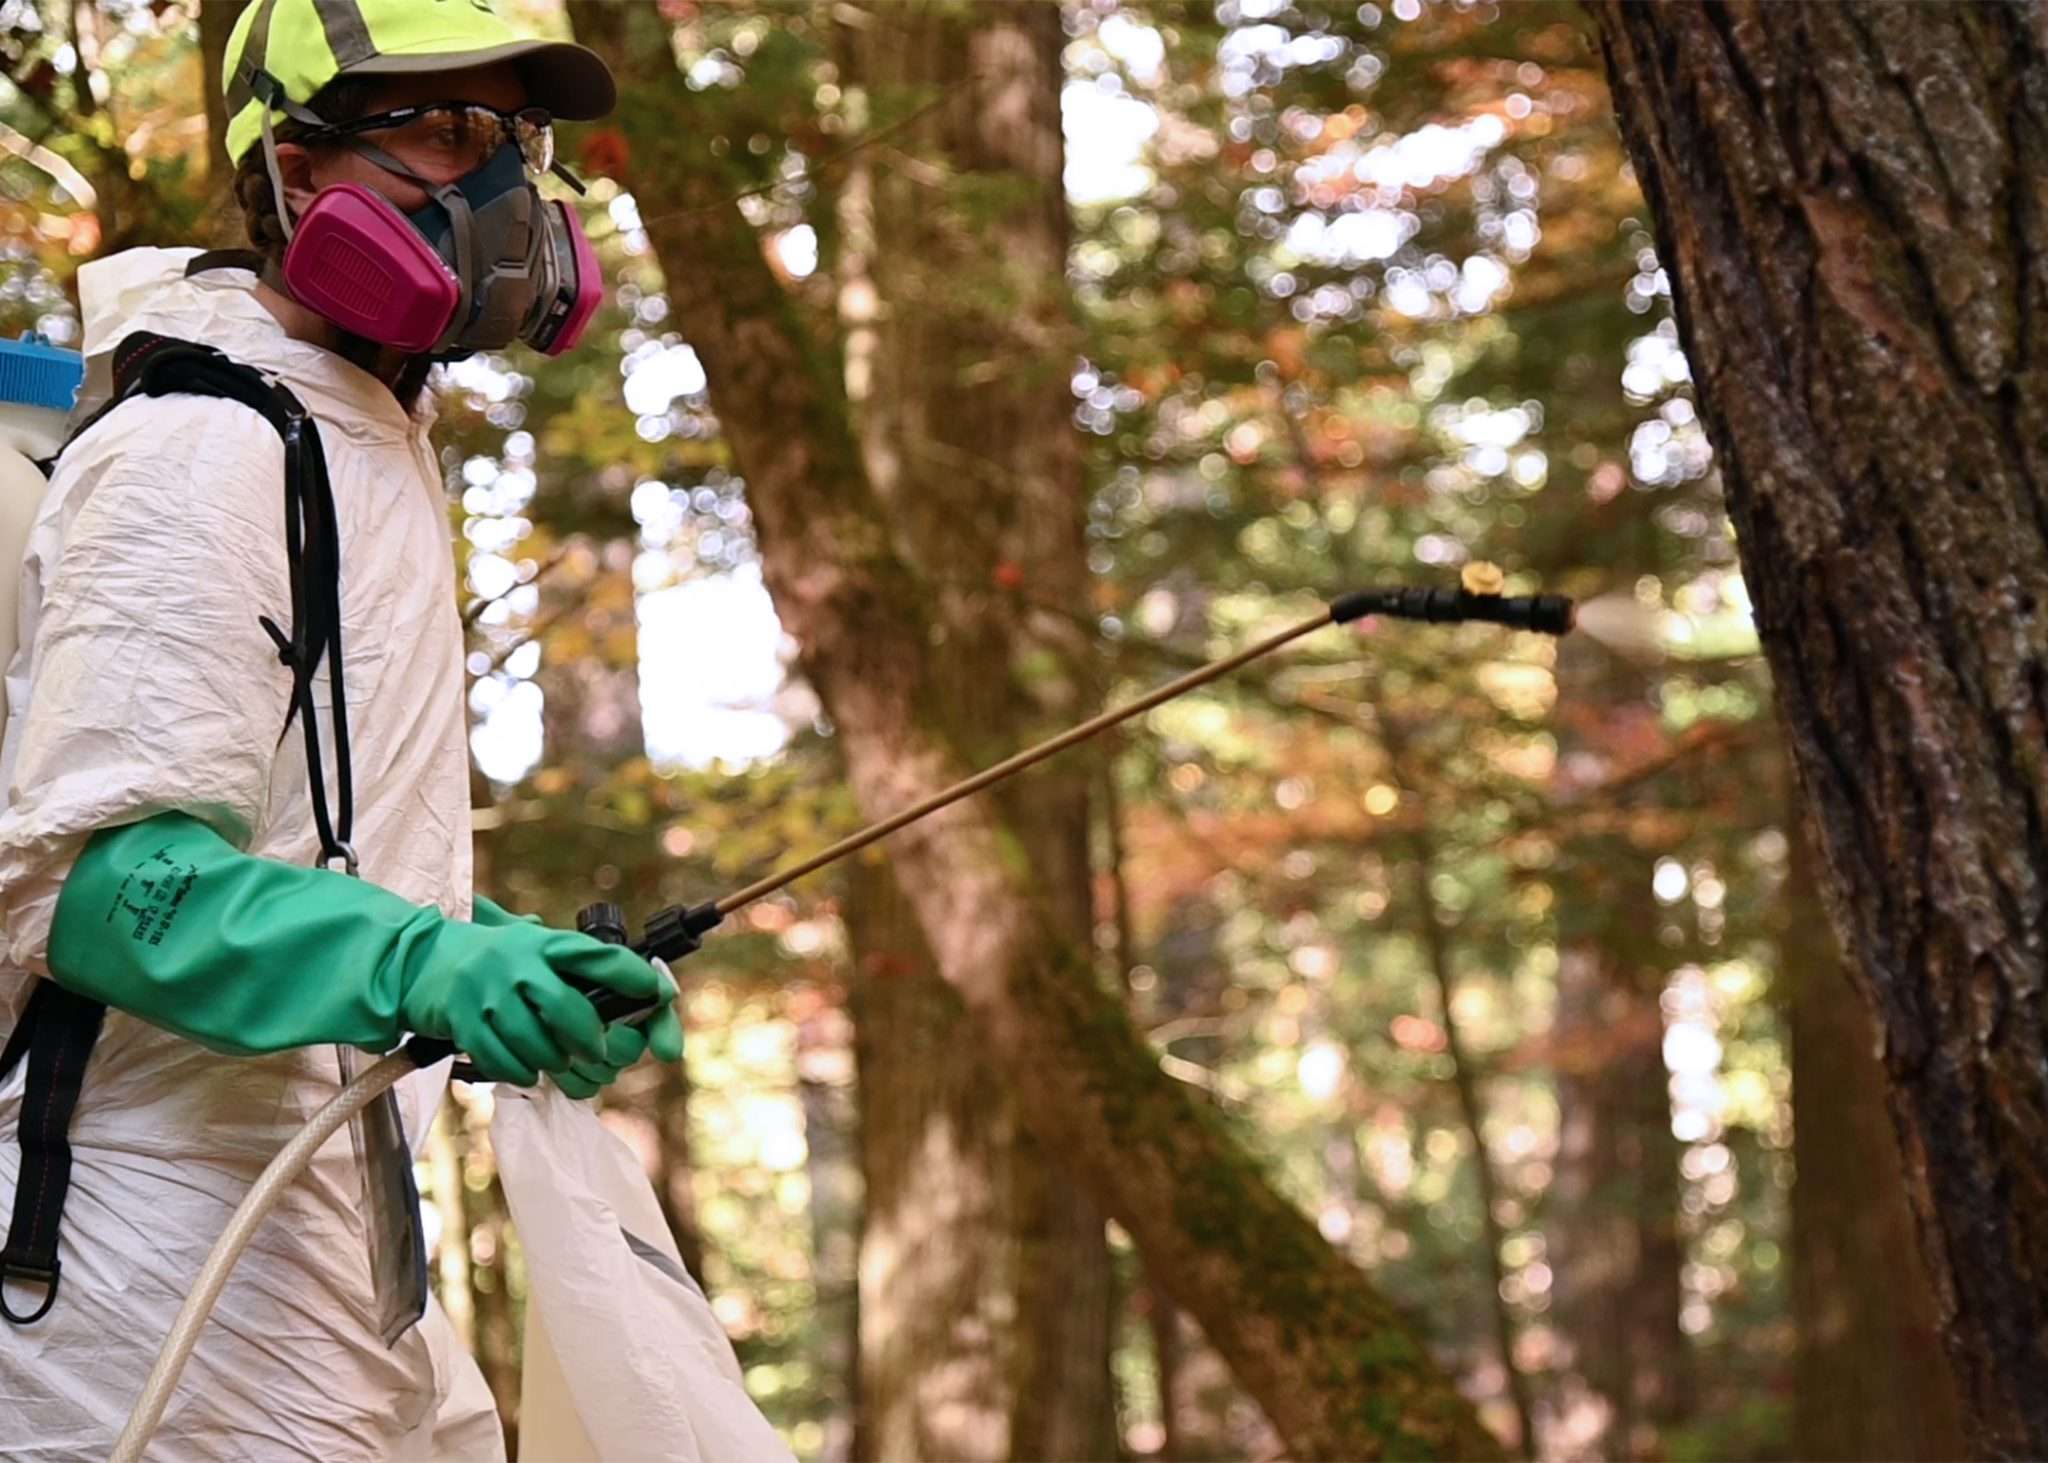 NYS DEC forest health applicators wear a gas mask, goggles over their eyes, a hat, gloves and a tyvec suit while treating hemlock trees to control an HWA infestation at Lake George.